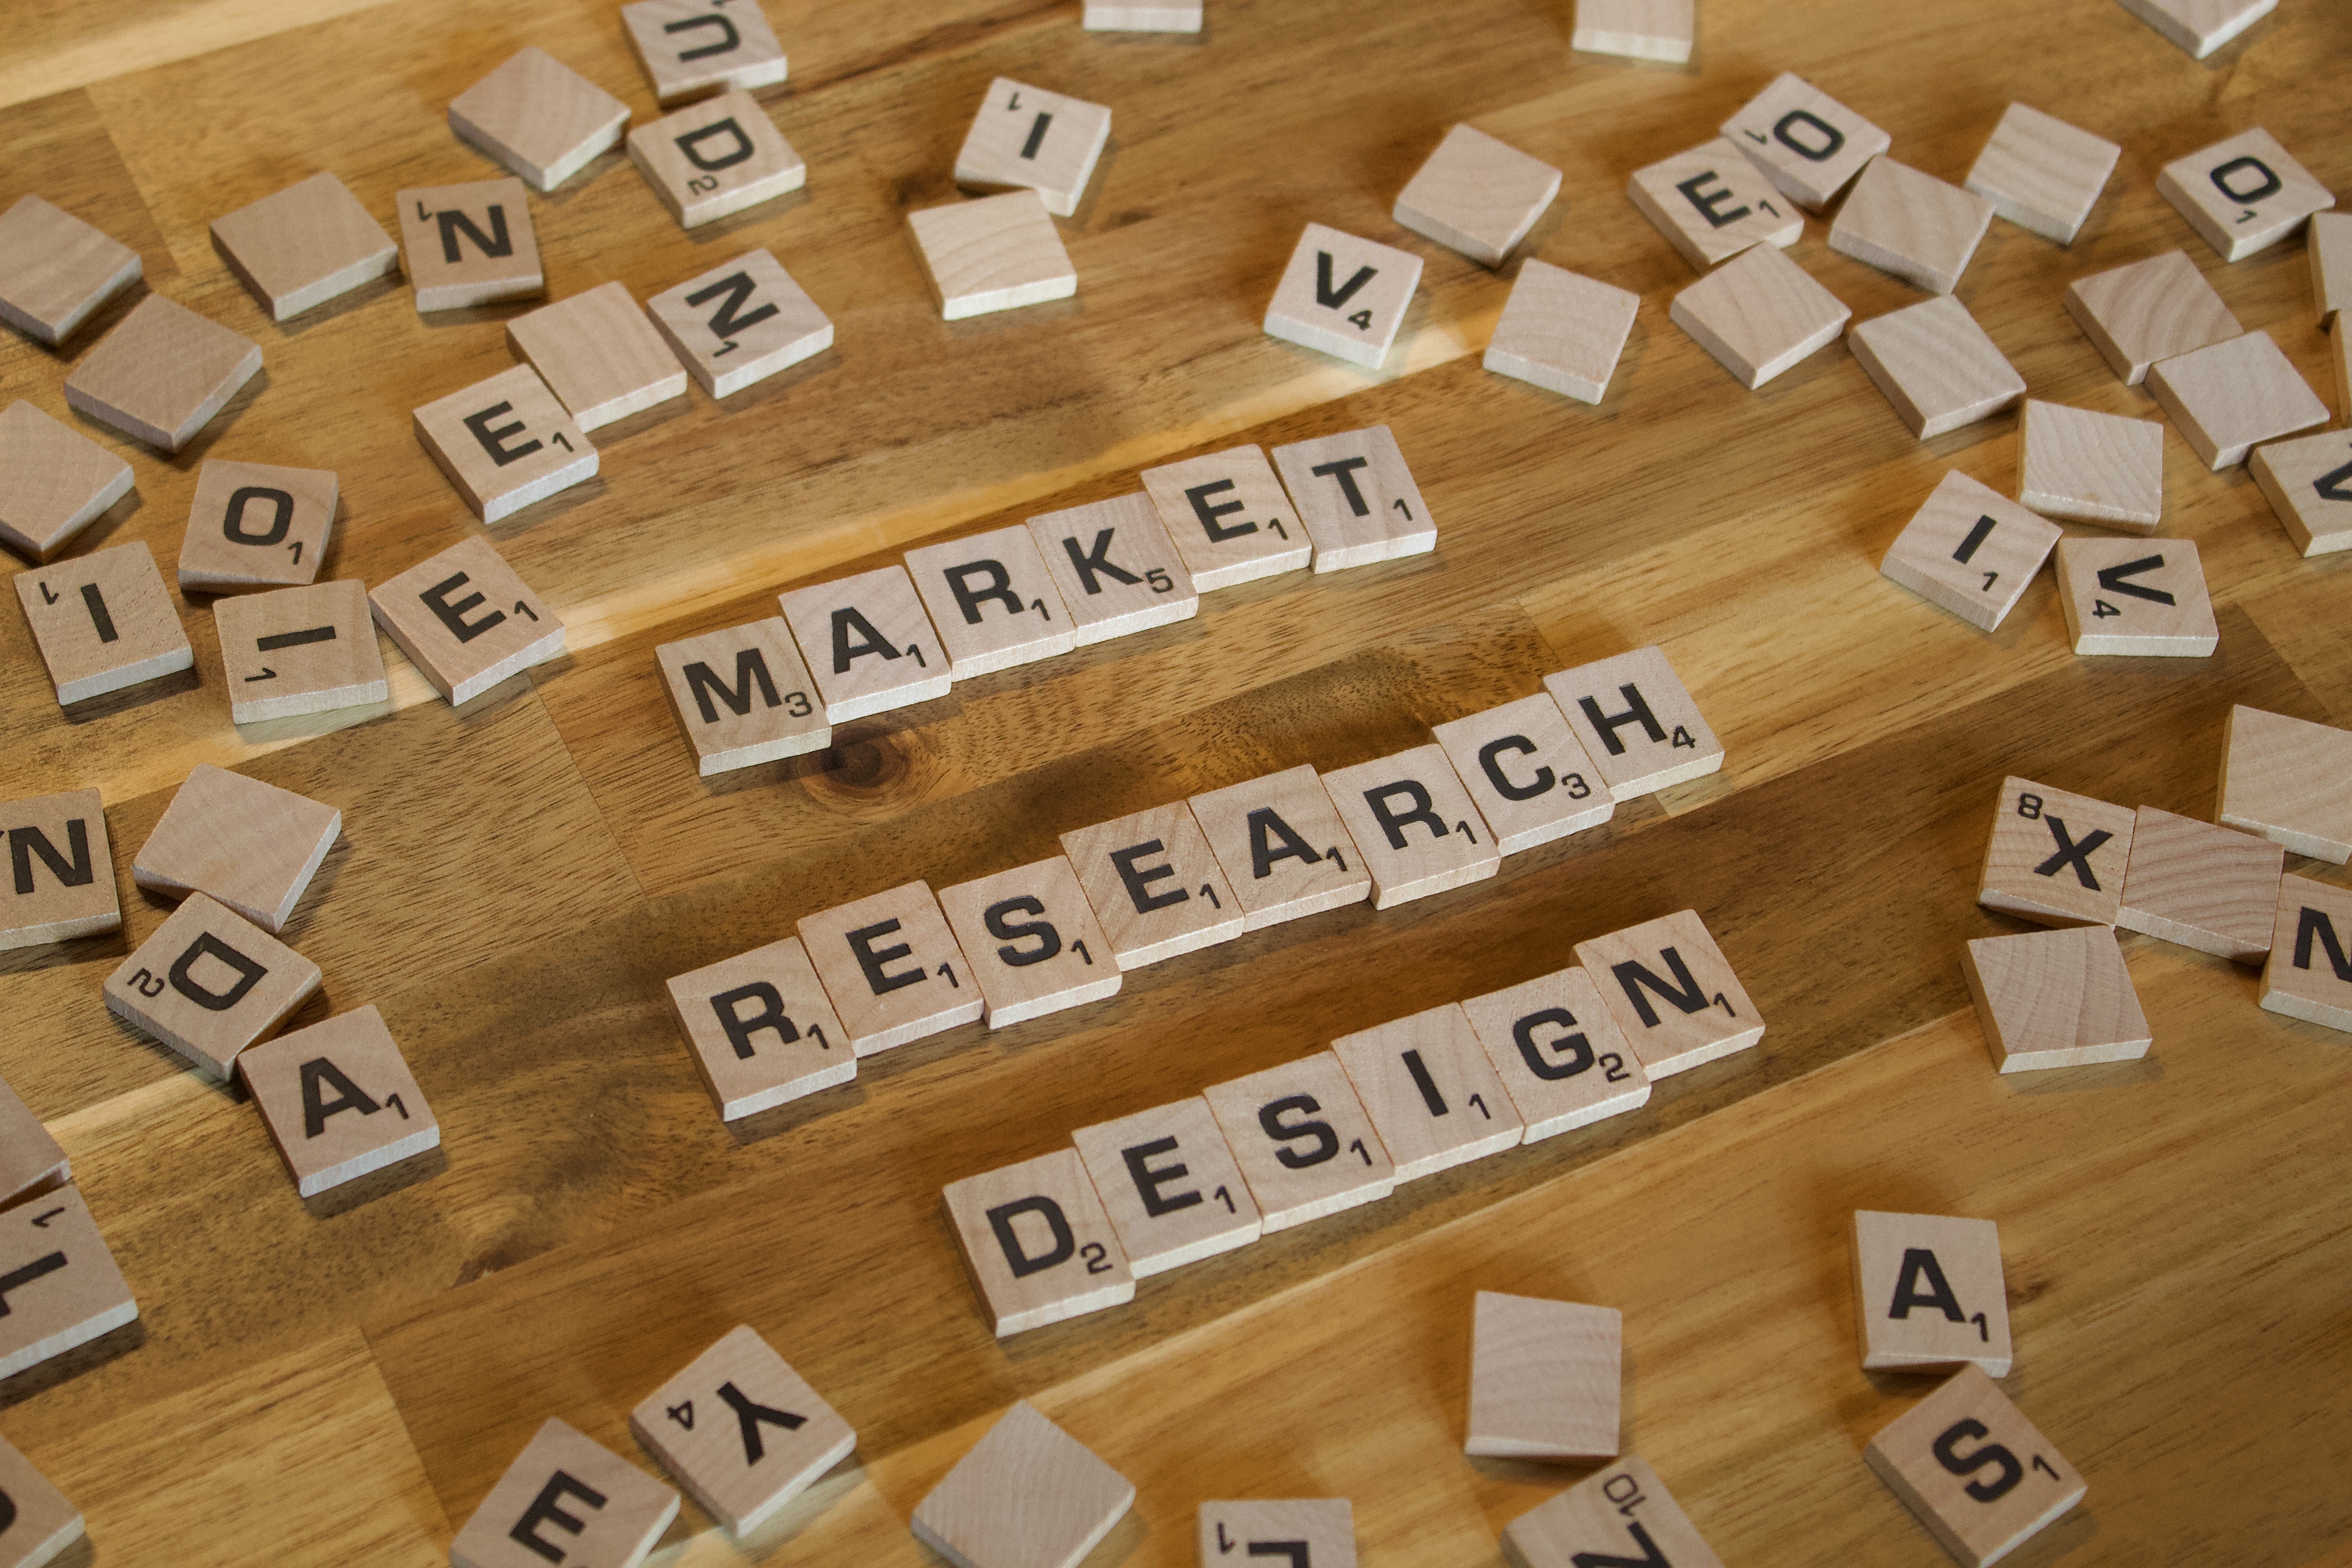 Market, research, design spelled out in Scrabble letters on a wooden table.